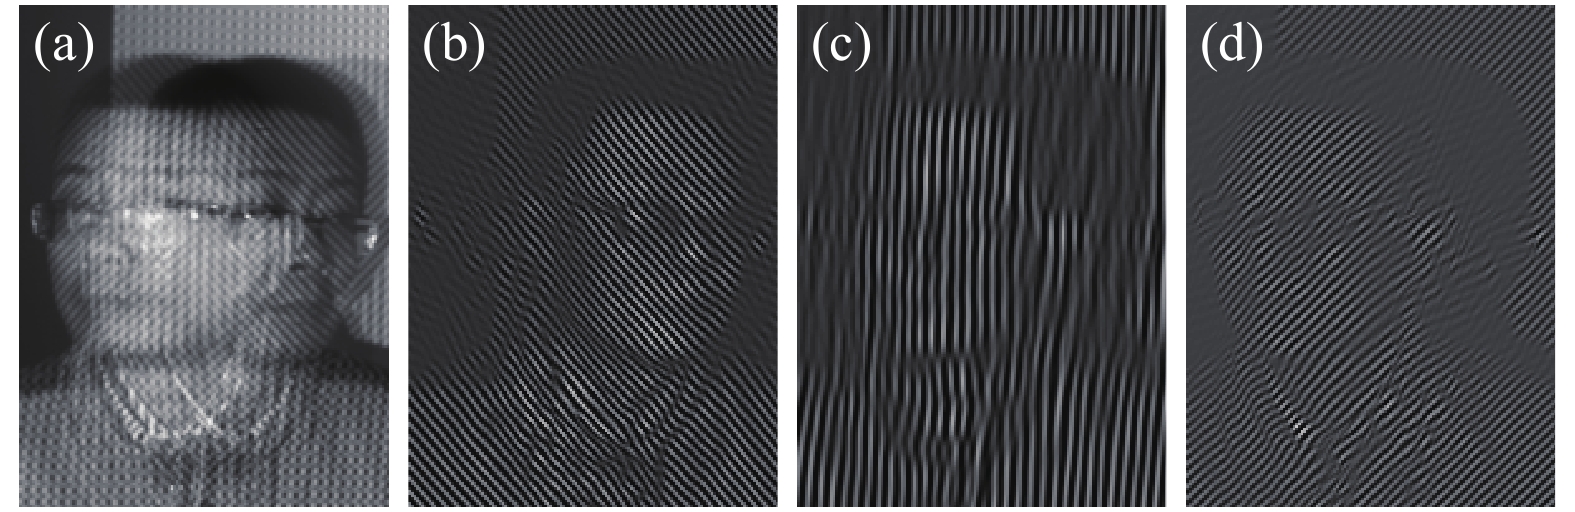 Experimental results of frequency multiplexing. (a) Original image； (b), (c), (d) fringes image at different moment separated by filtering